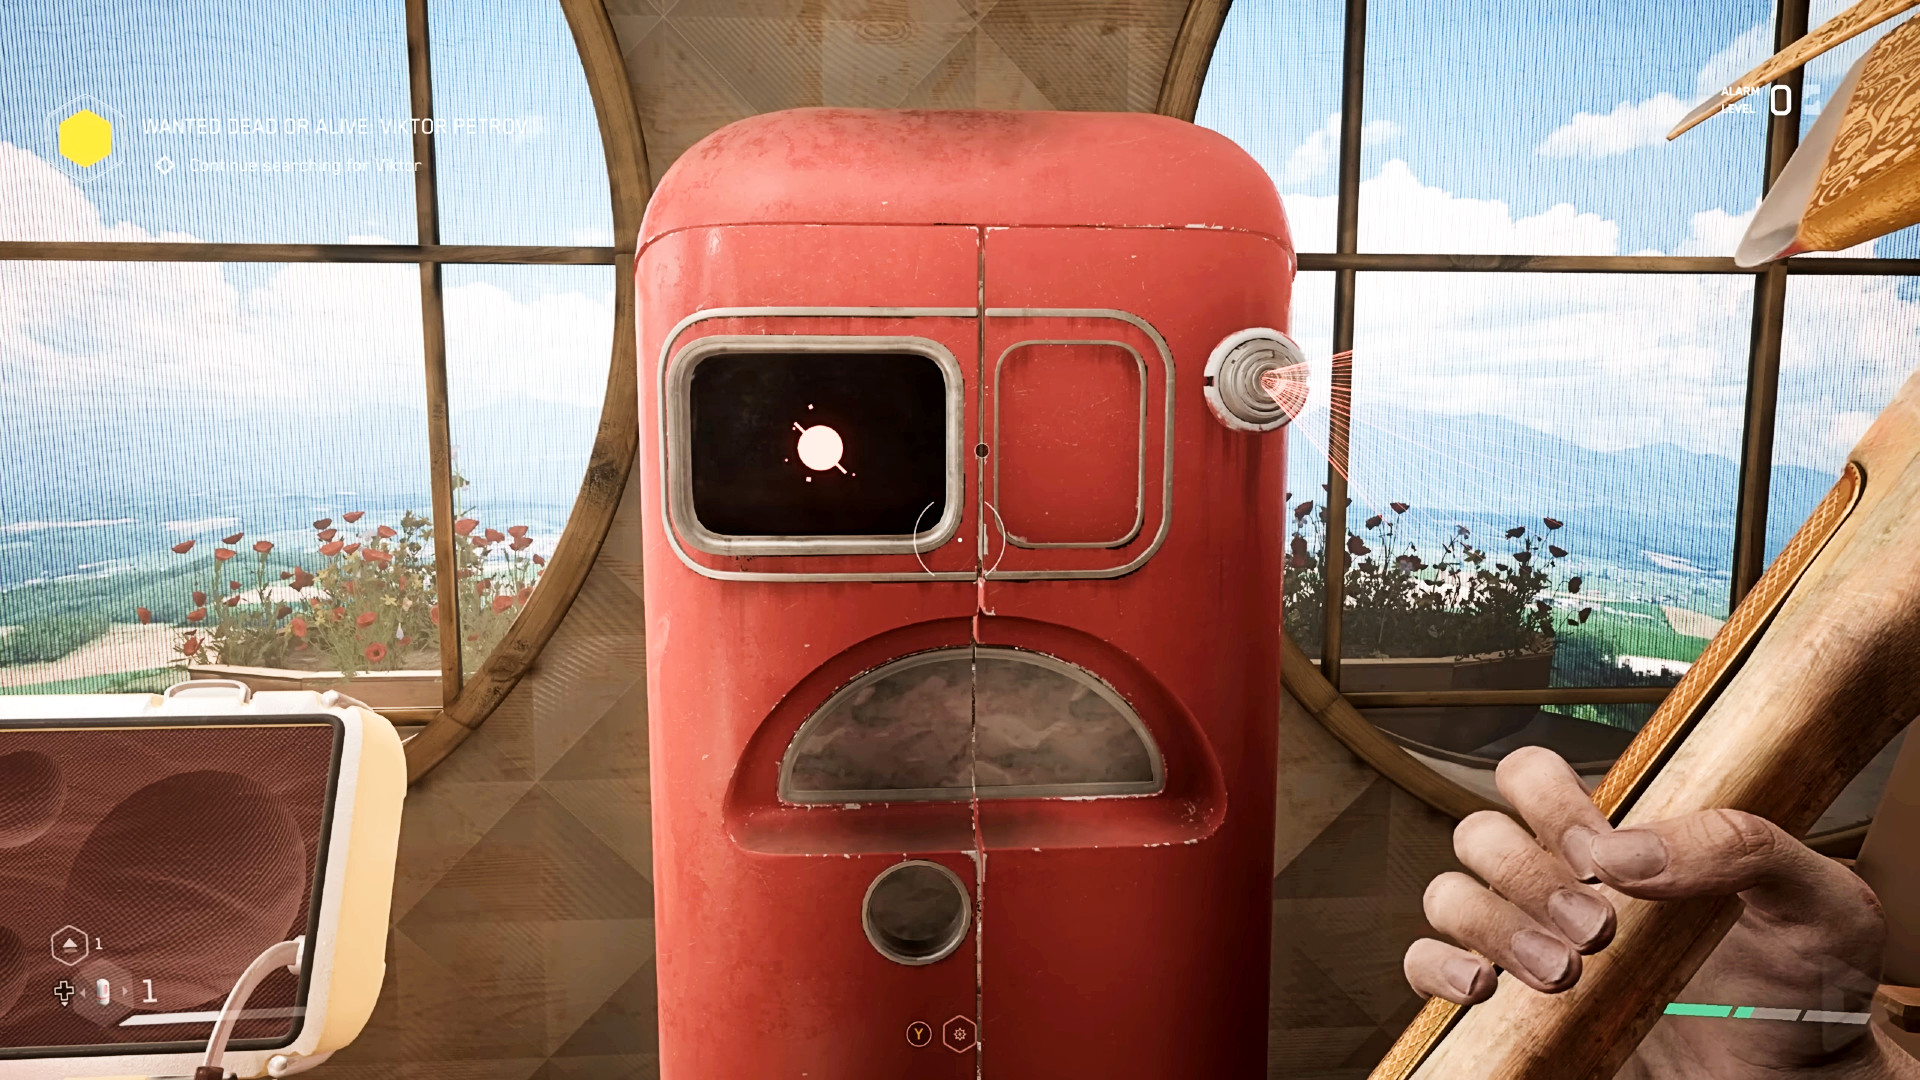 Atomic Heart teases surreal new DLC's “atypical gameplay” amid sale